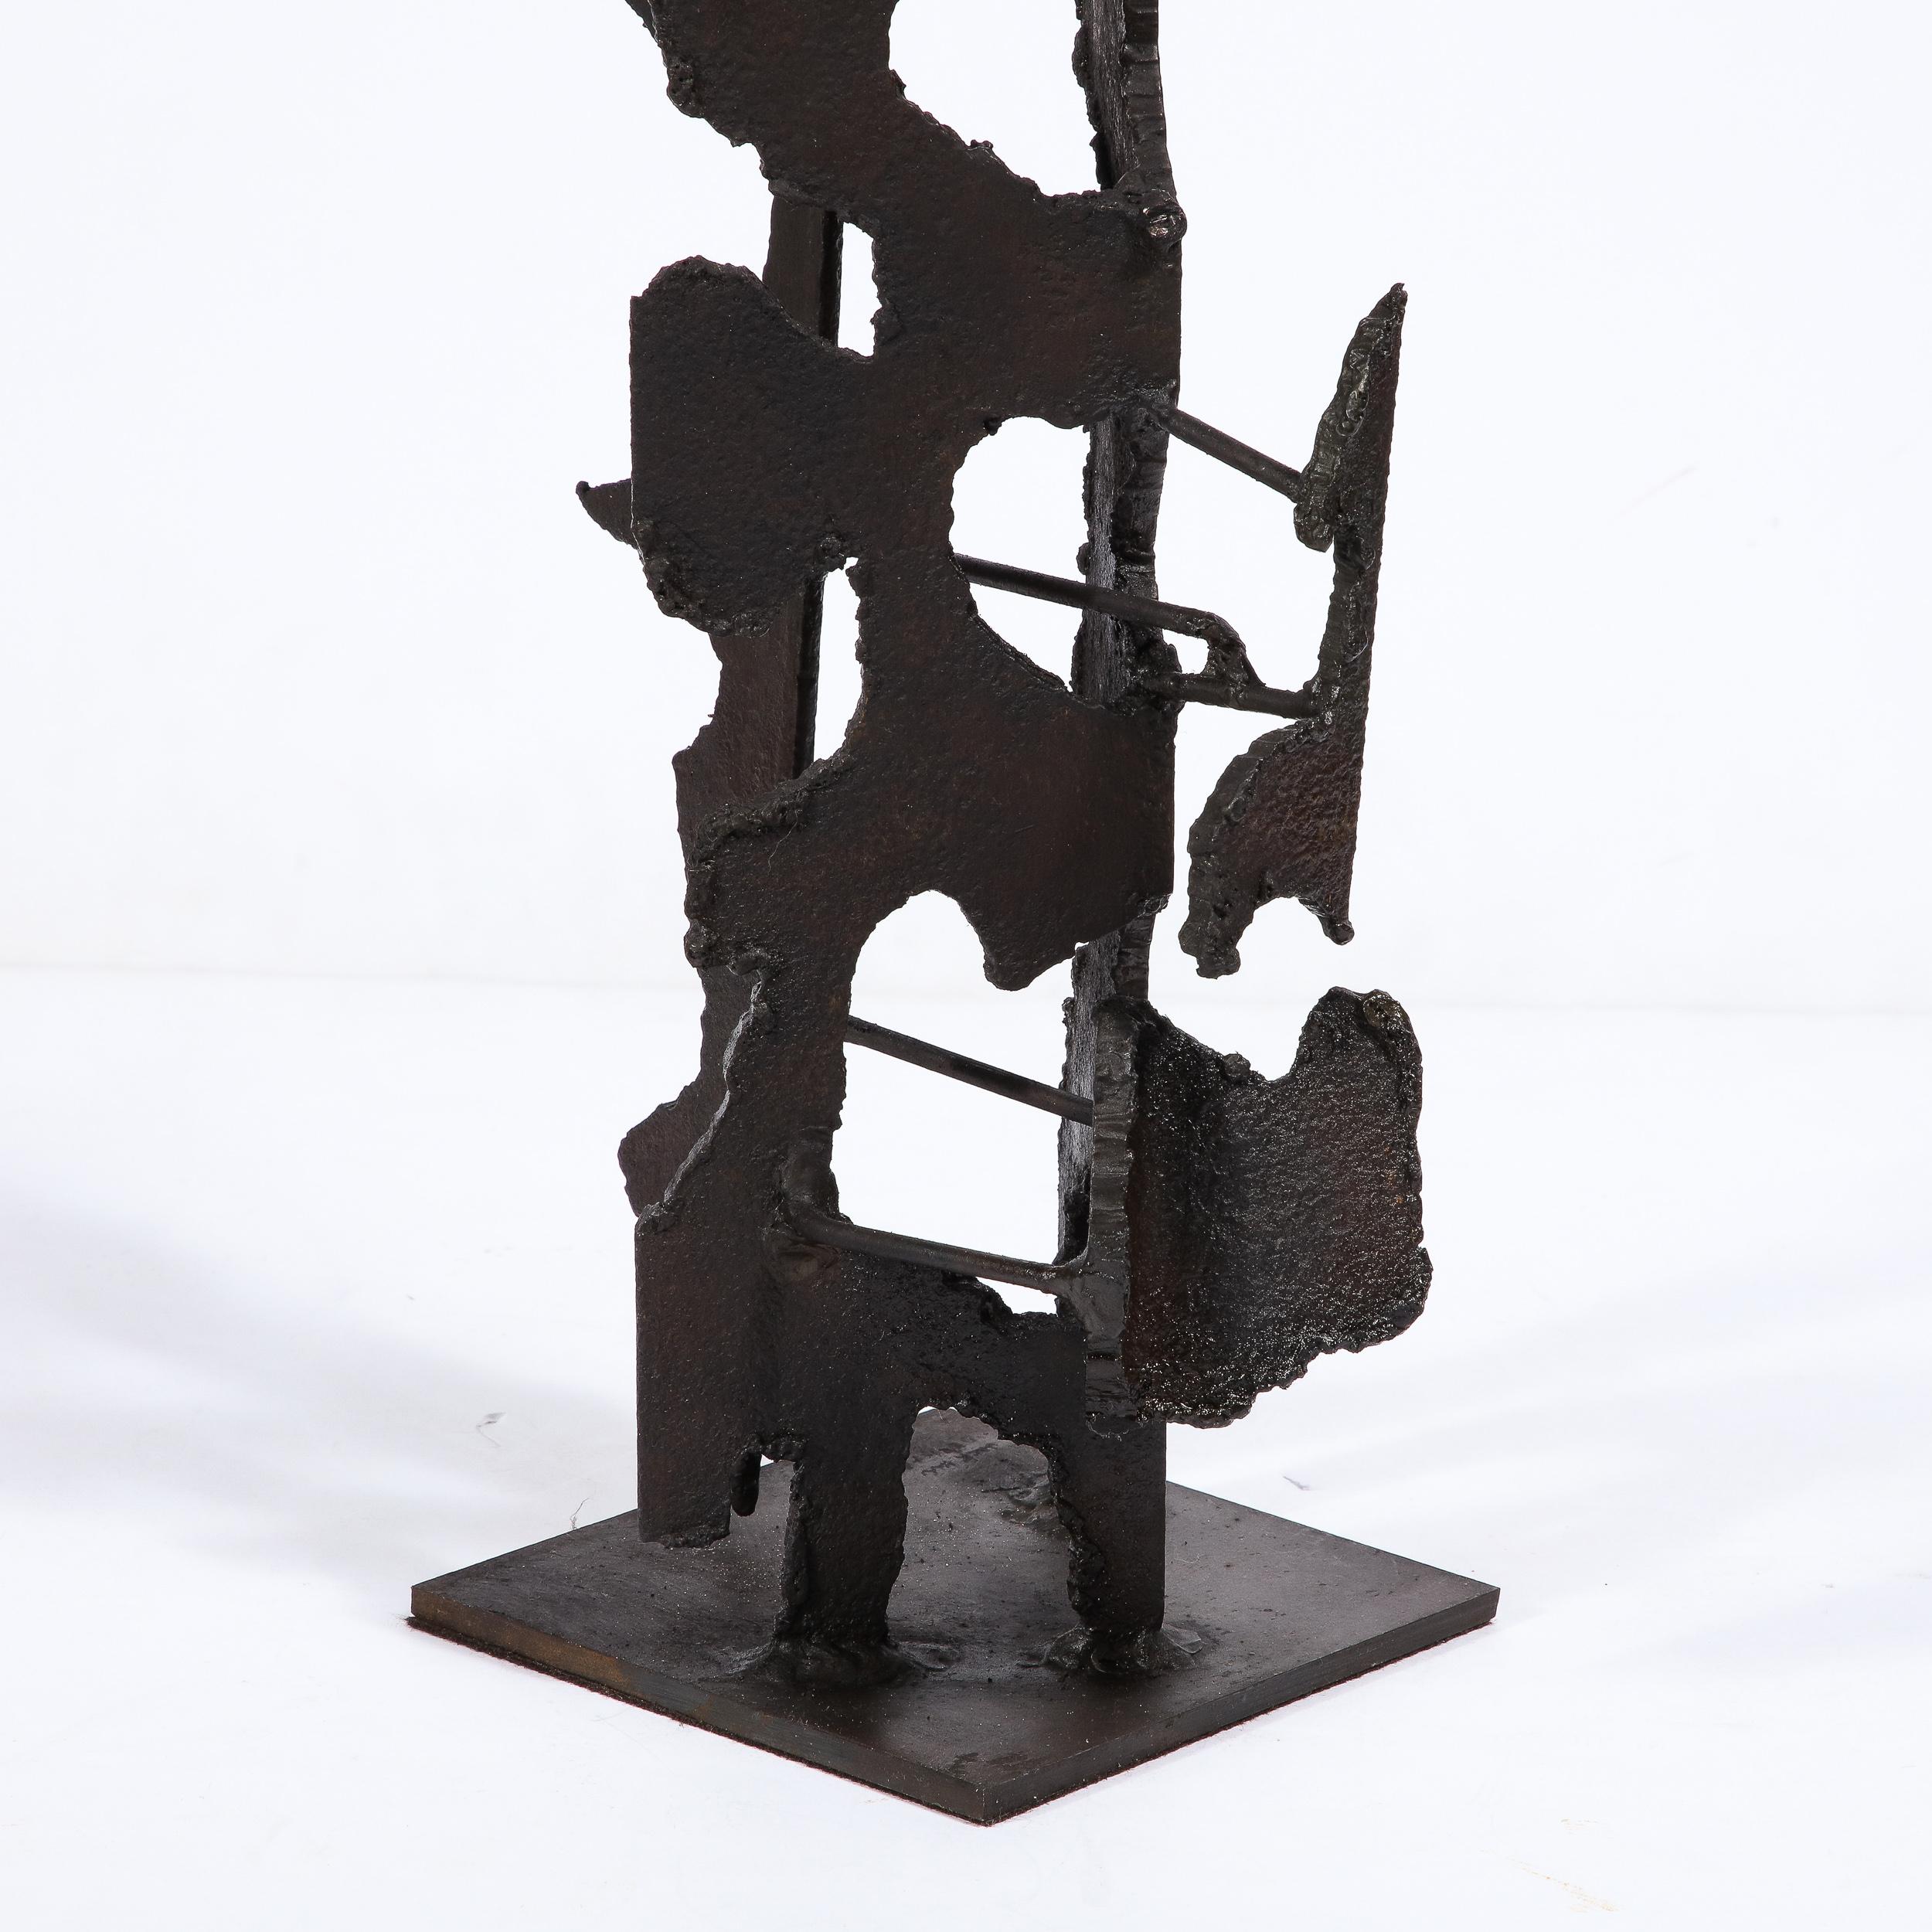 Brutalist Steel Sculpture in Oil and Waxed Finish by Jan Van Deckter For Sale 6